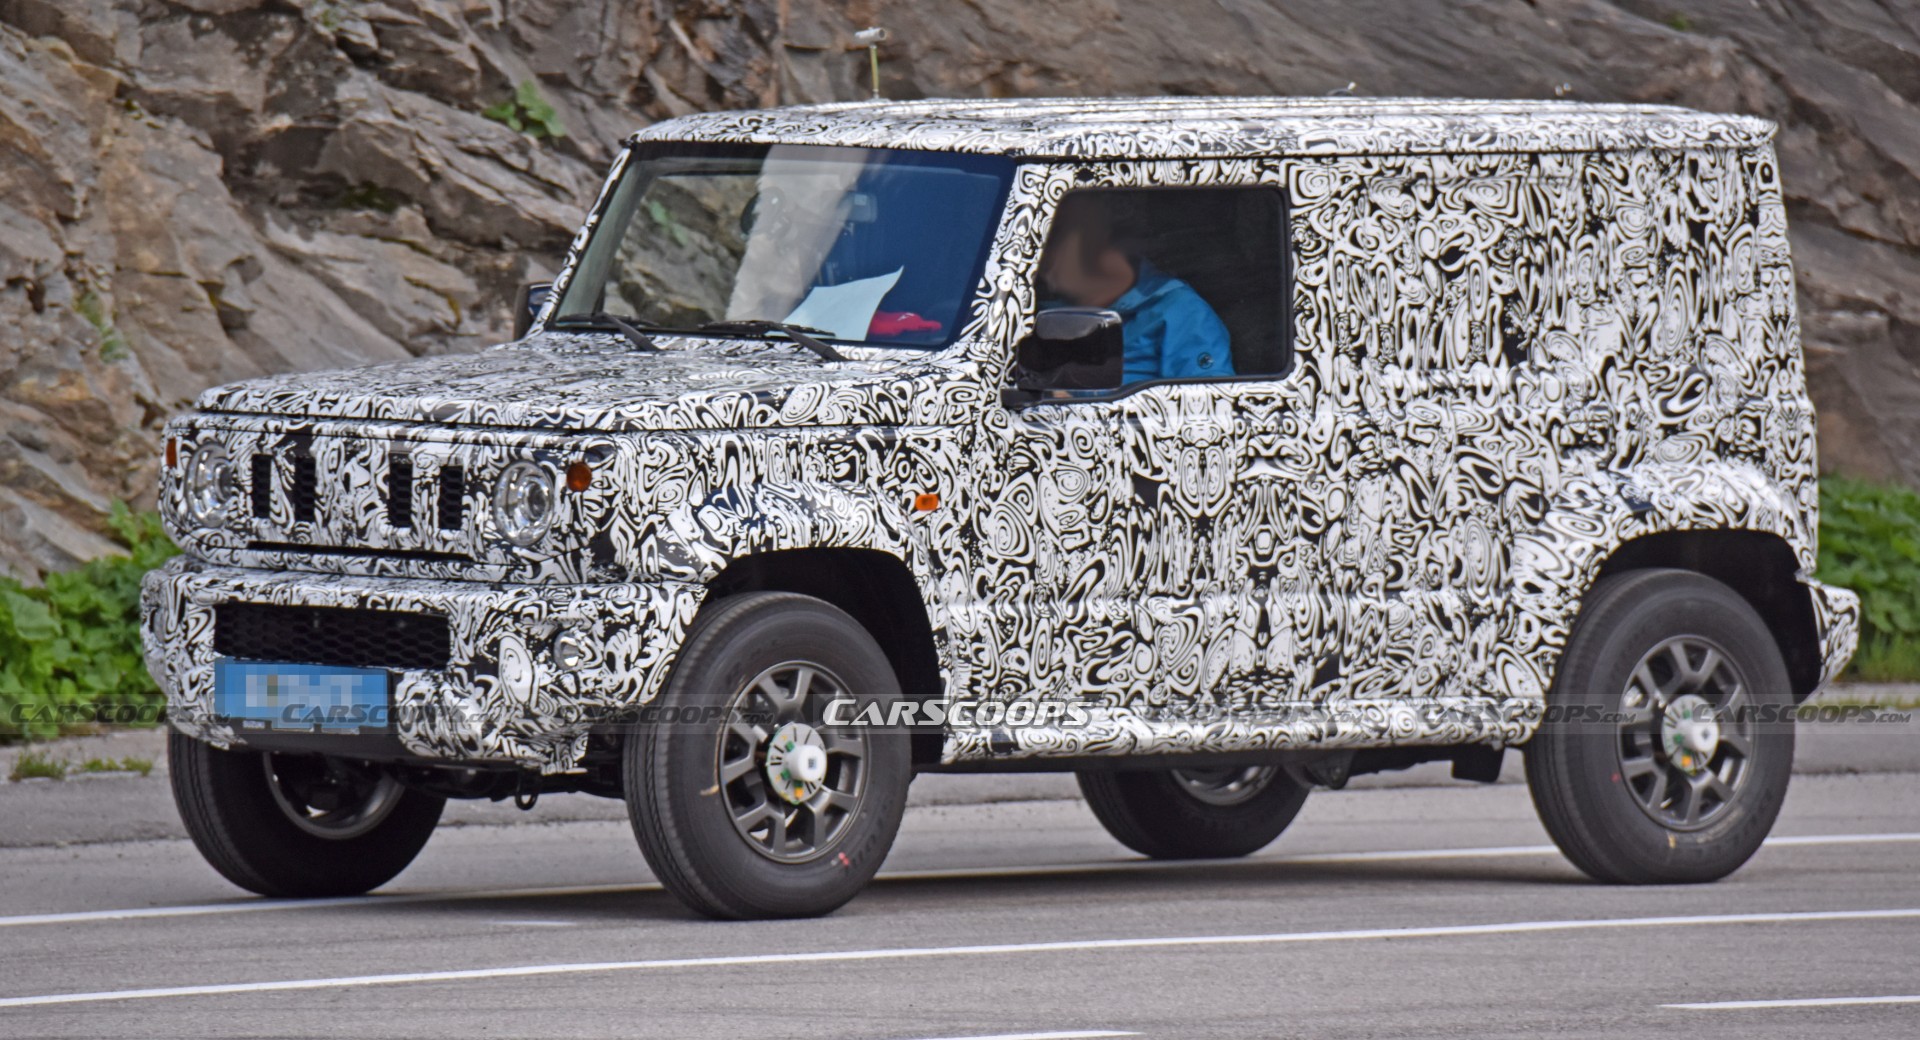 New Suzuki Jimny 5Door Prototype Spotted In Europe, Could Get A Hybrid